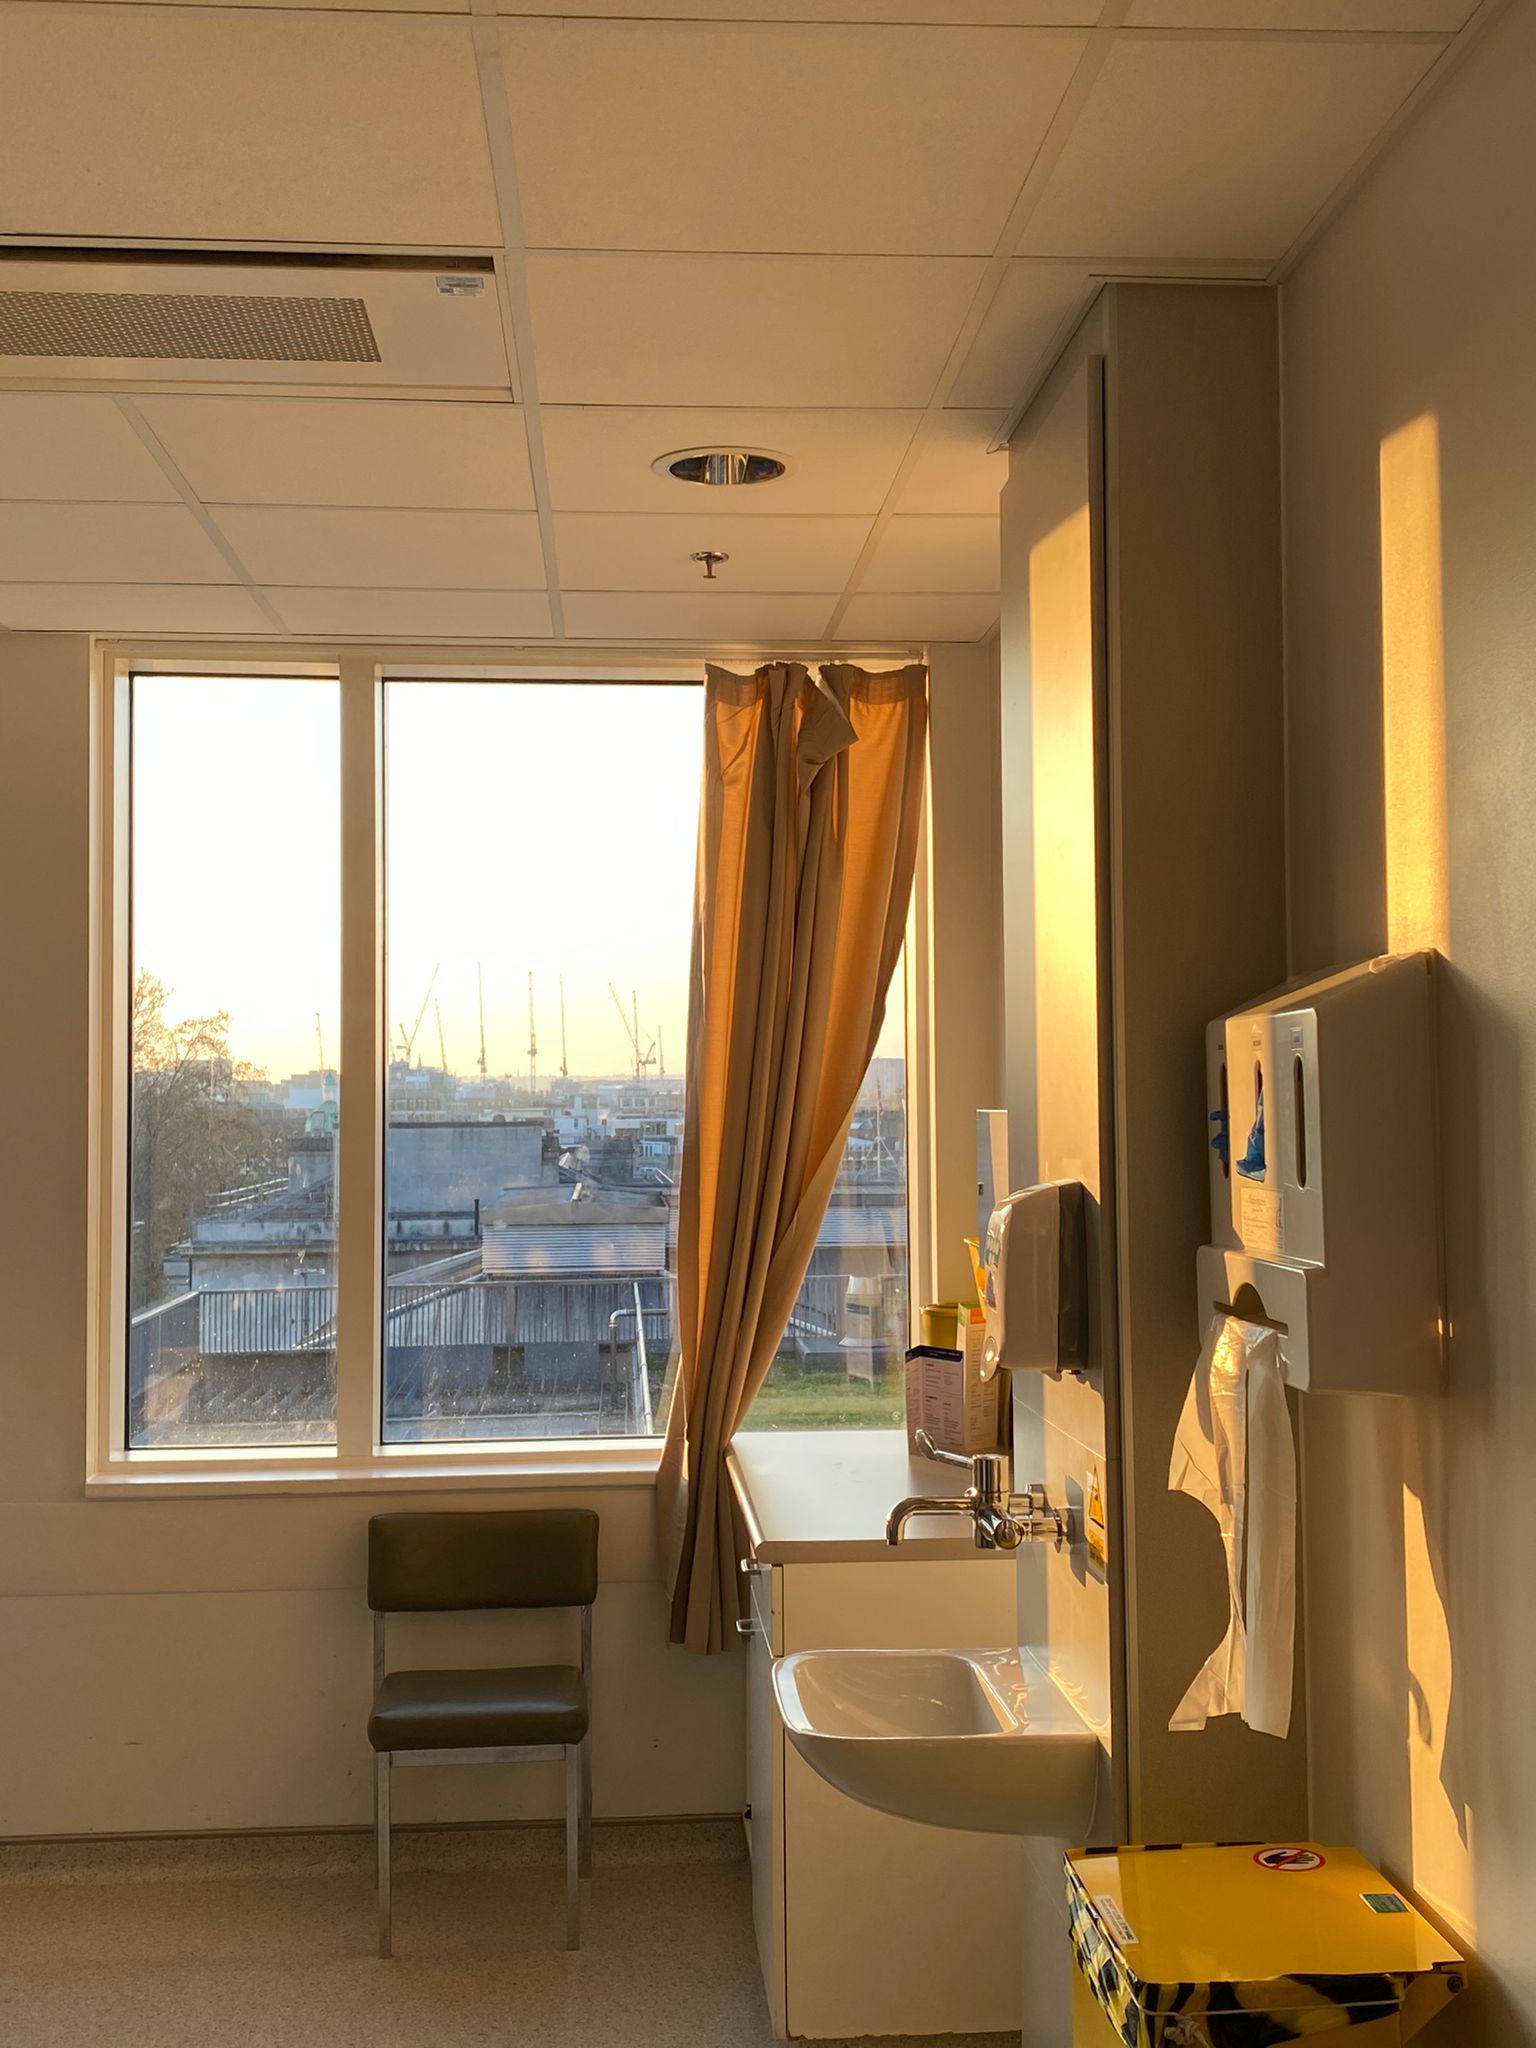 A hospital room with a window and a sink.